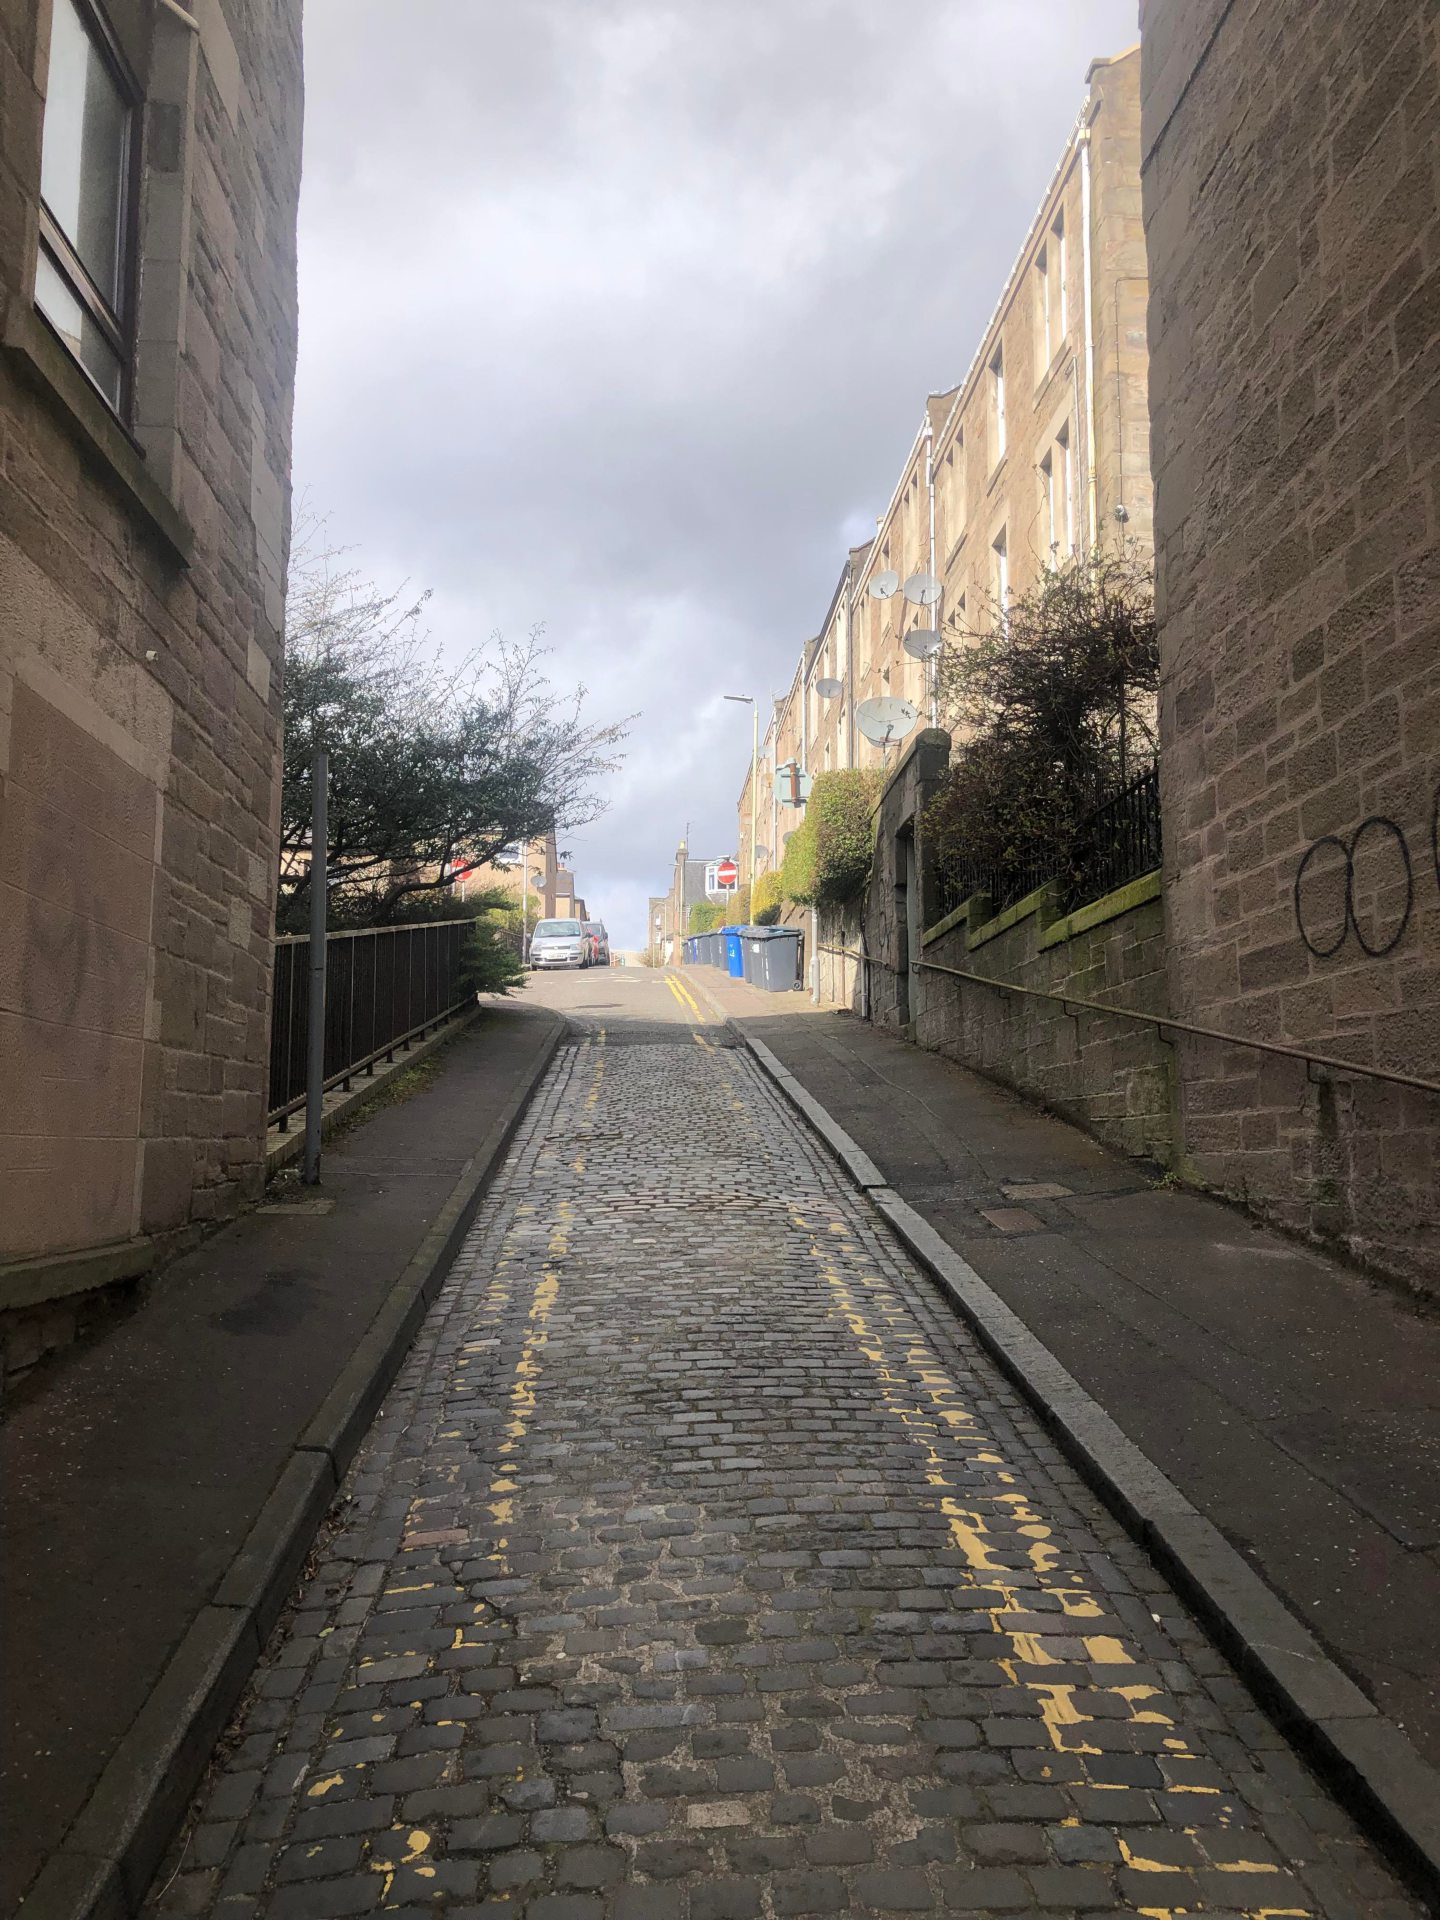 Bonnybank Road in Dundee, where Bear the dog was stolen